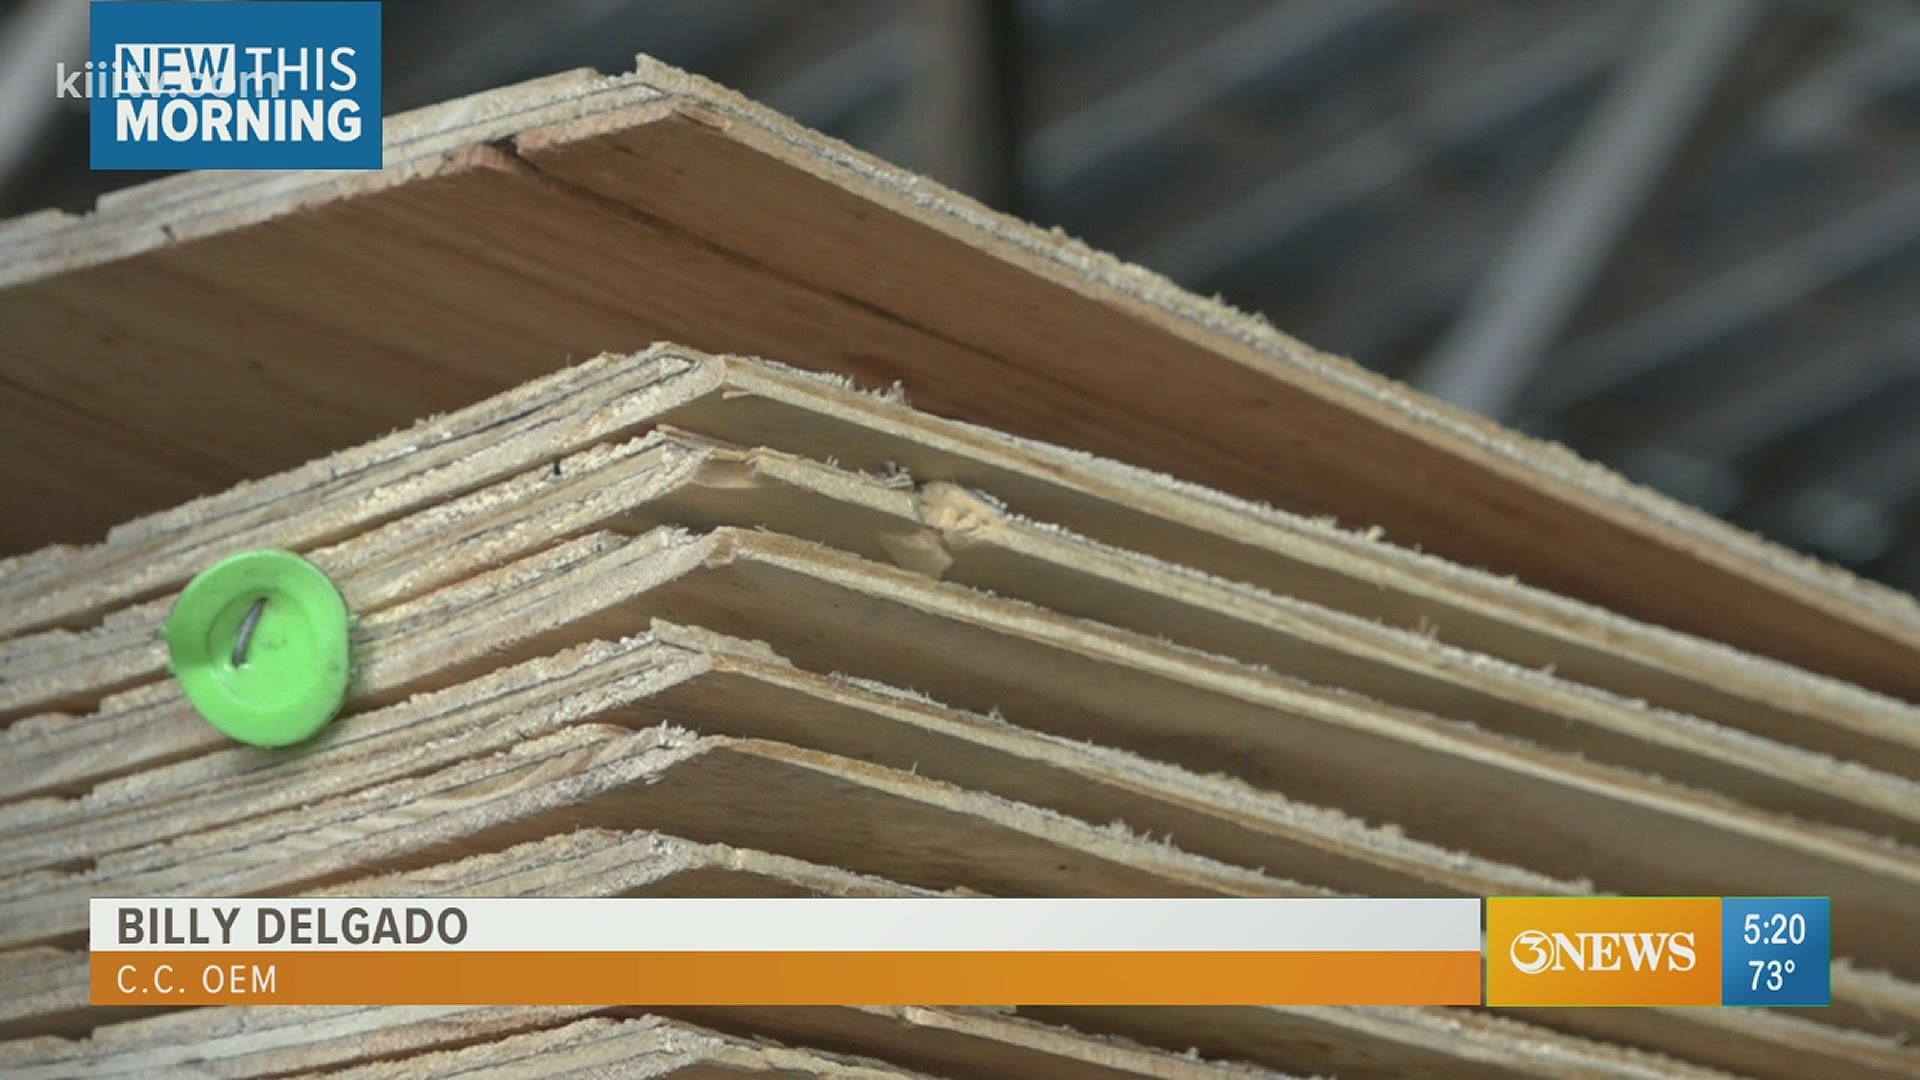 The ongoing shortage in lumber raised prices among the market, specifically for plywood.